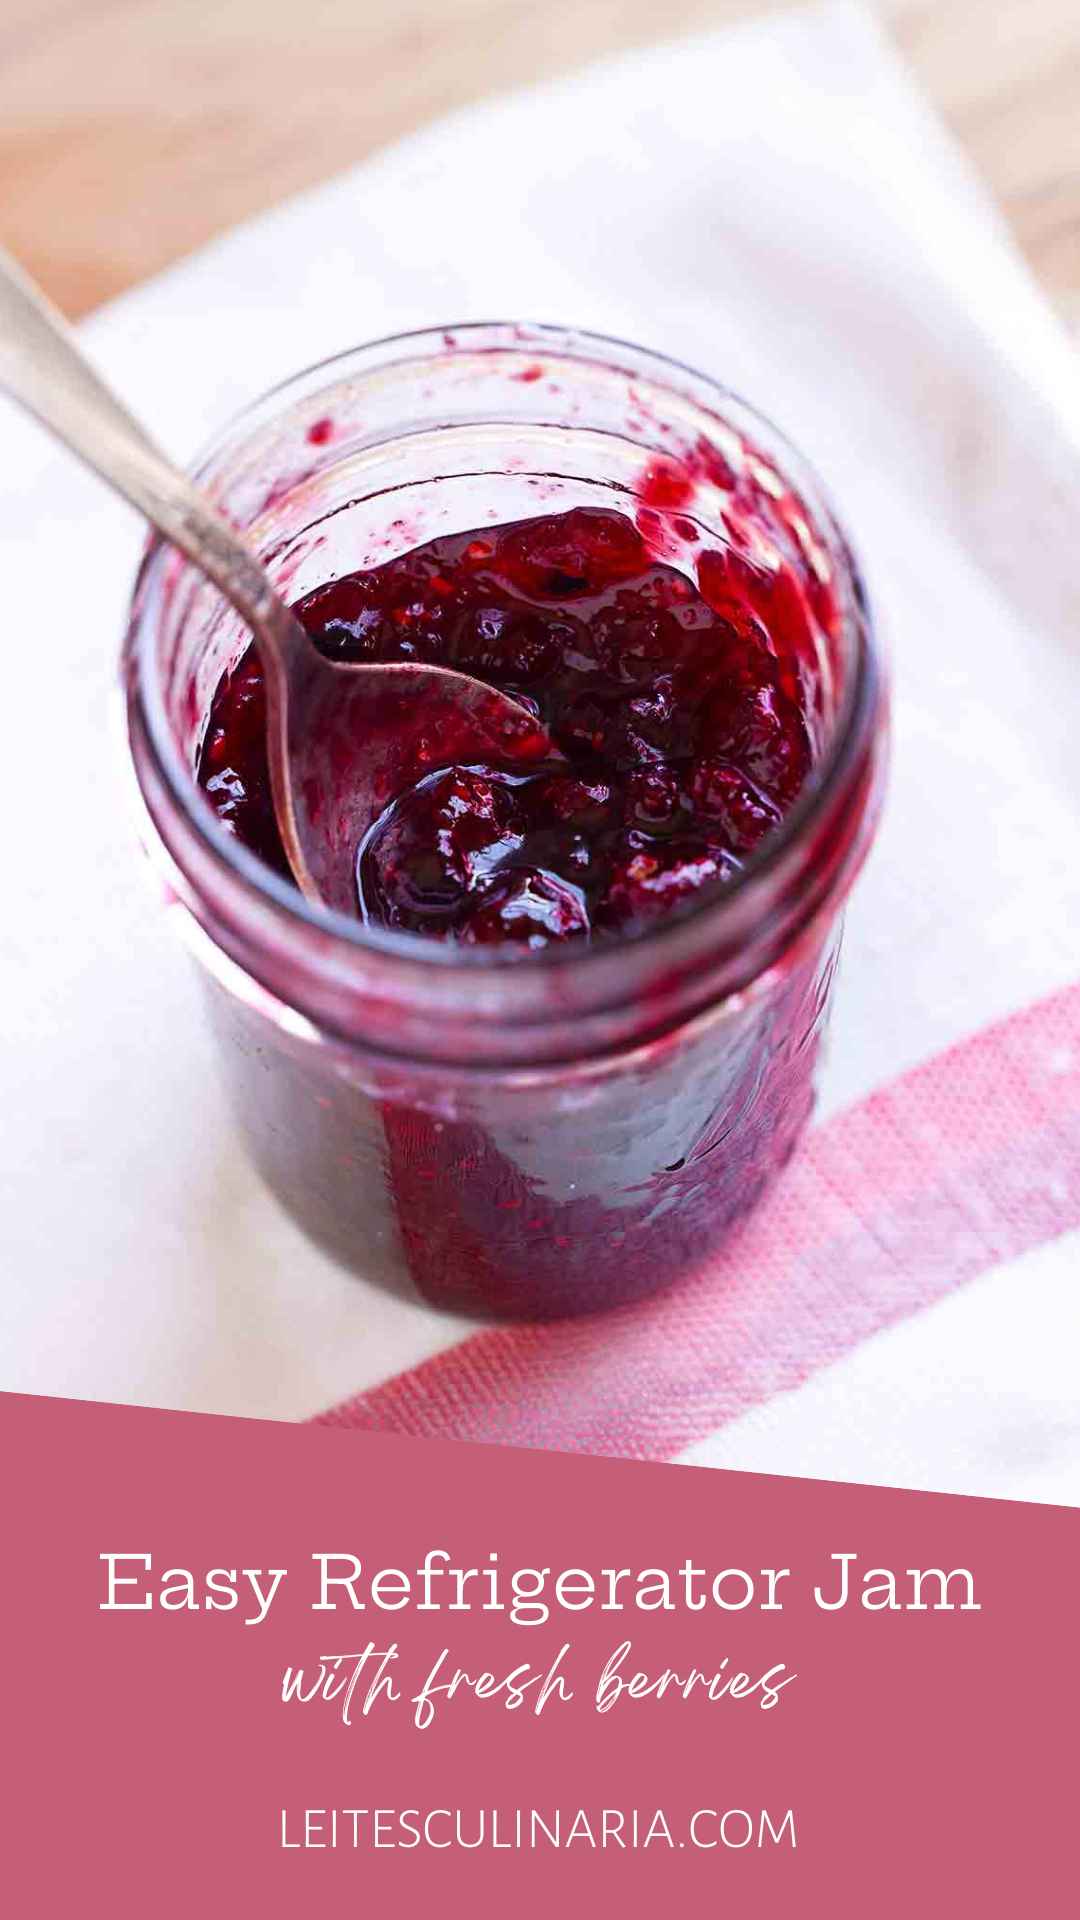 An open jar of homemade refrigerator jam with a spoon resting inside it.